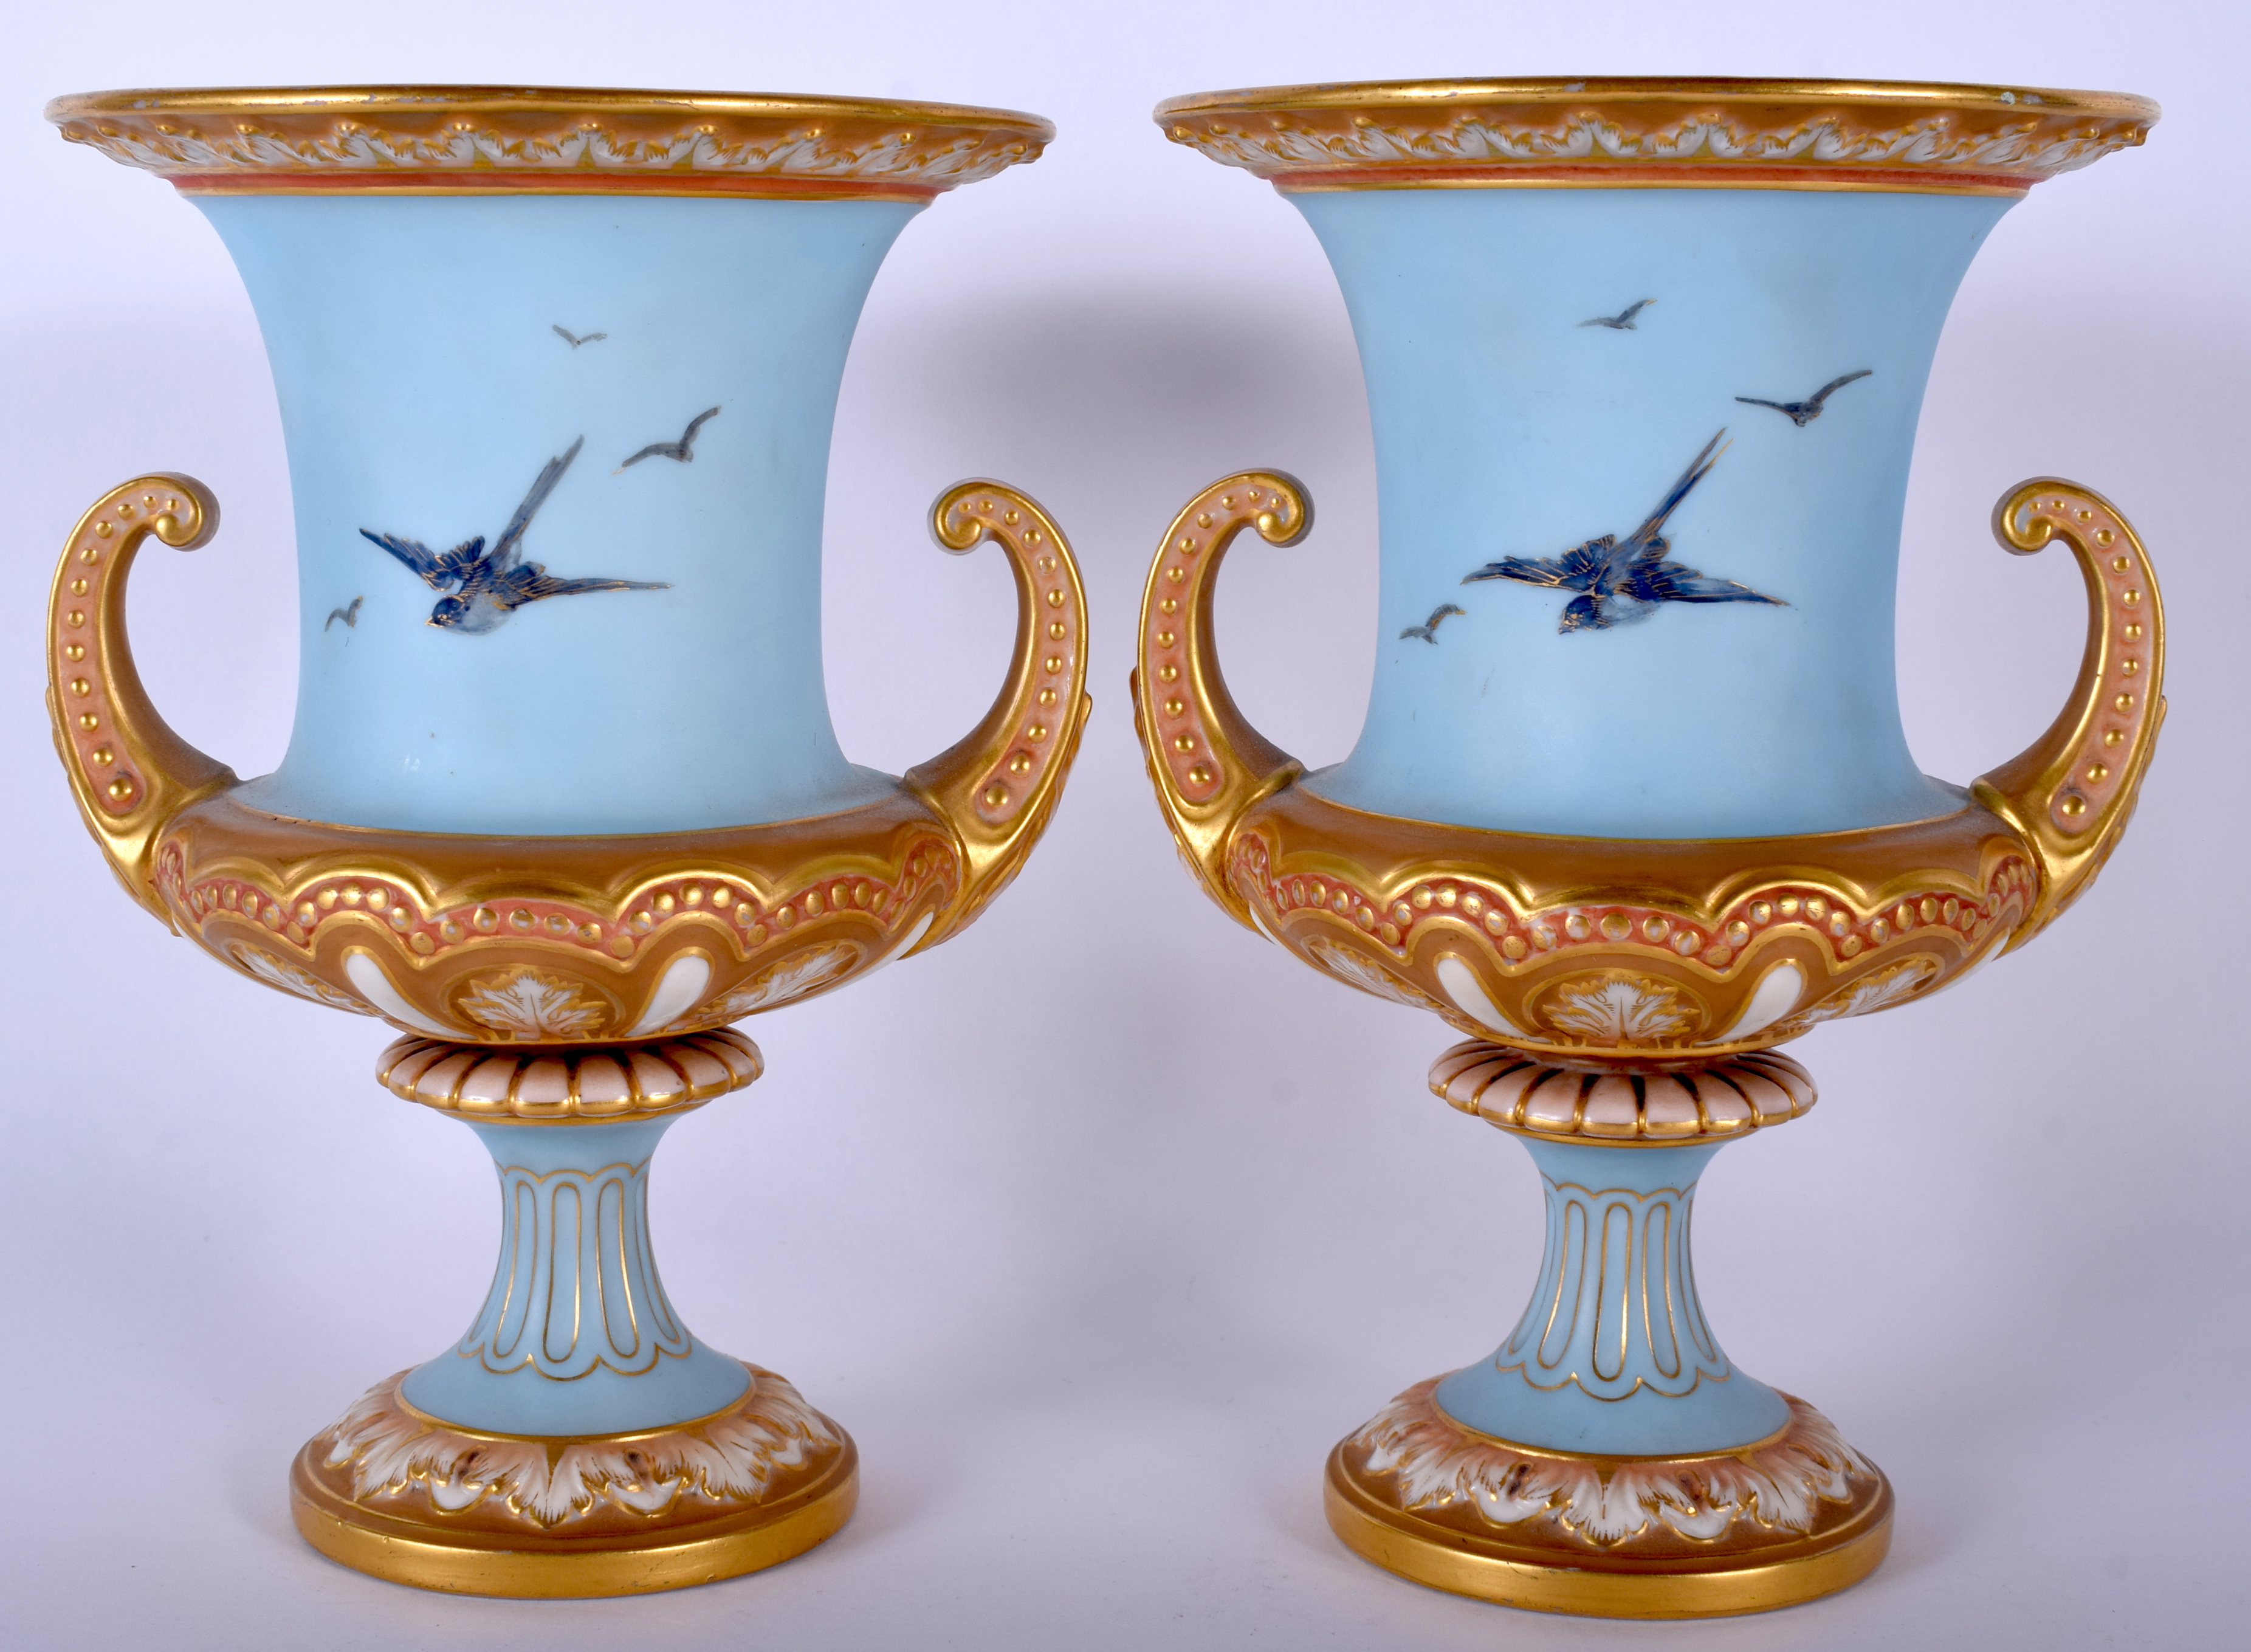 A PAIR OF ROYAL WORCESTER TWIN HANDLED PORCELAIN URN VASES by Charles Baldwyn, painted with swans. - Image 2 of 3